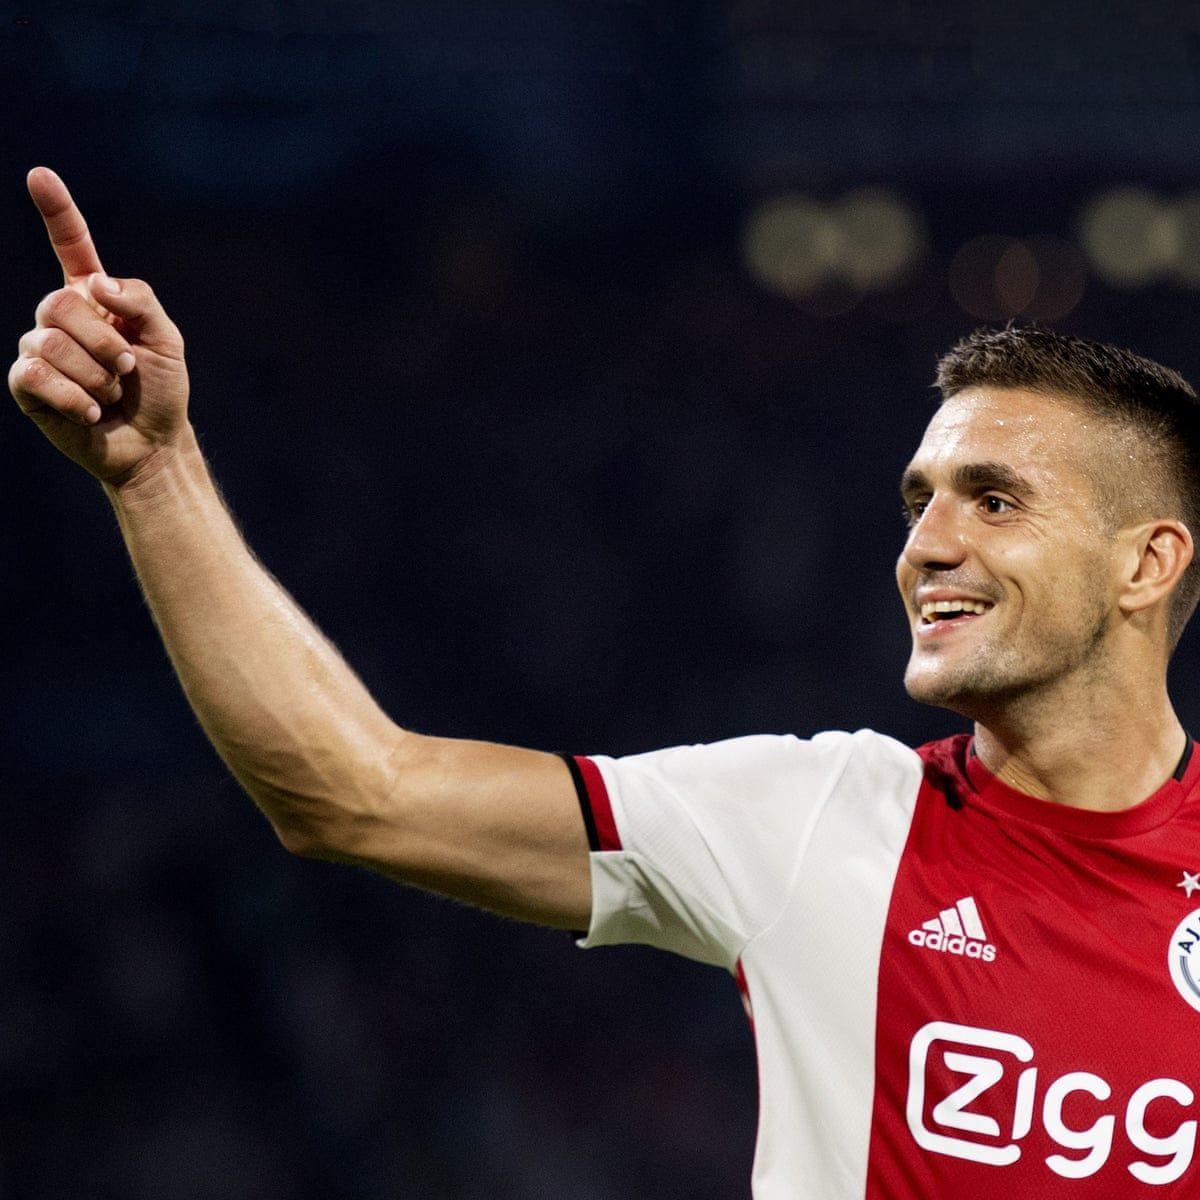 Ajax's Dusan Tadic: 'You cannot buy happiness. Inside I feel rich'